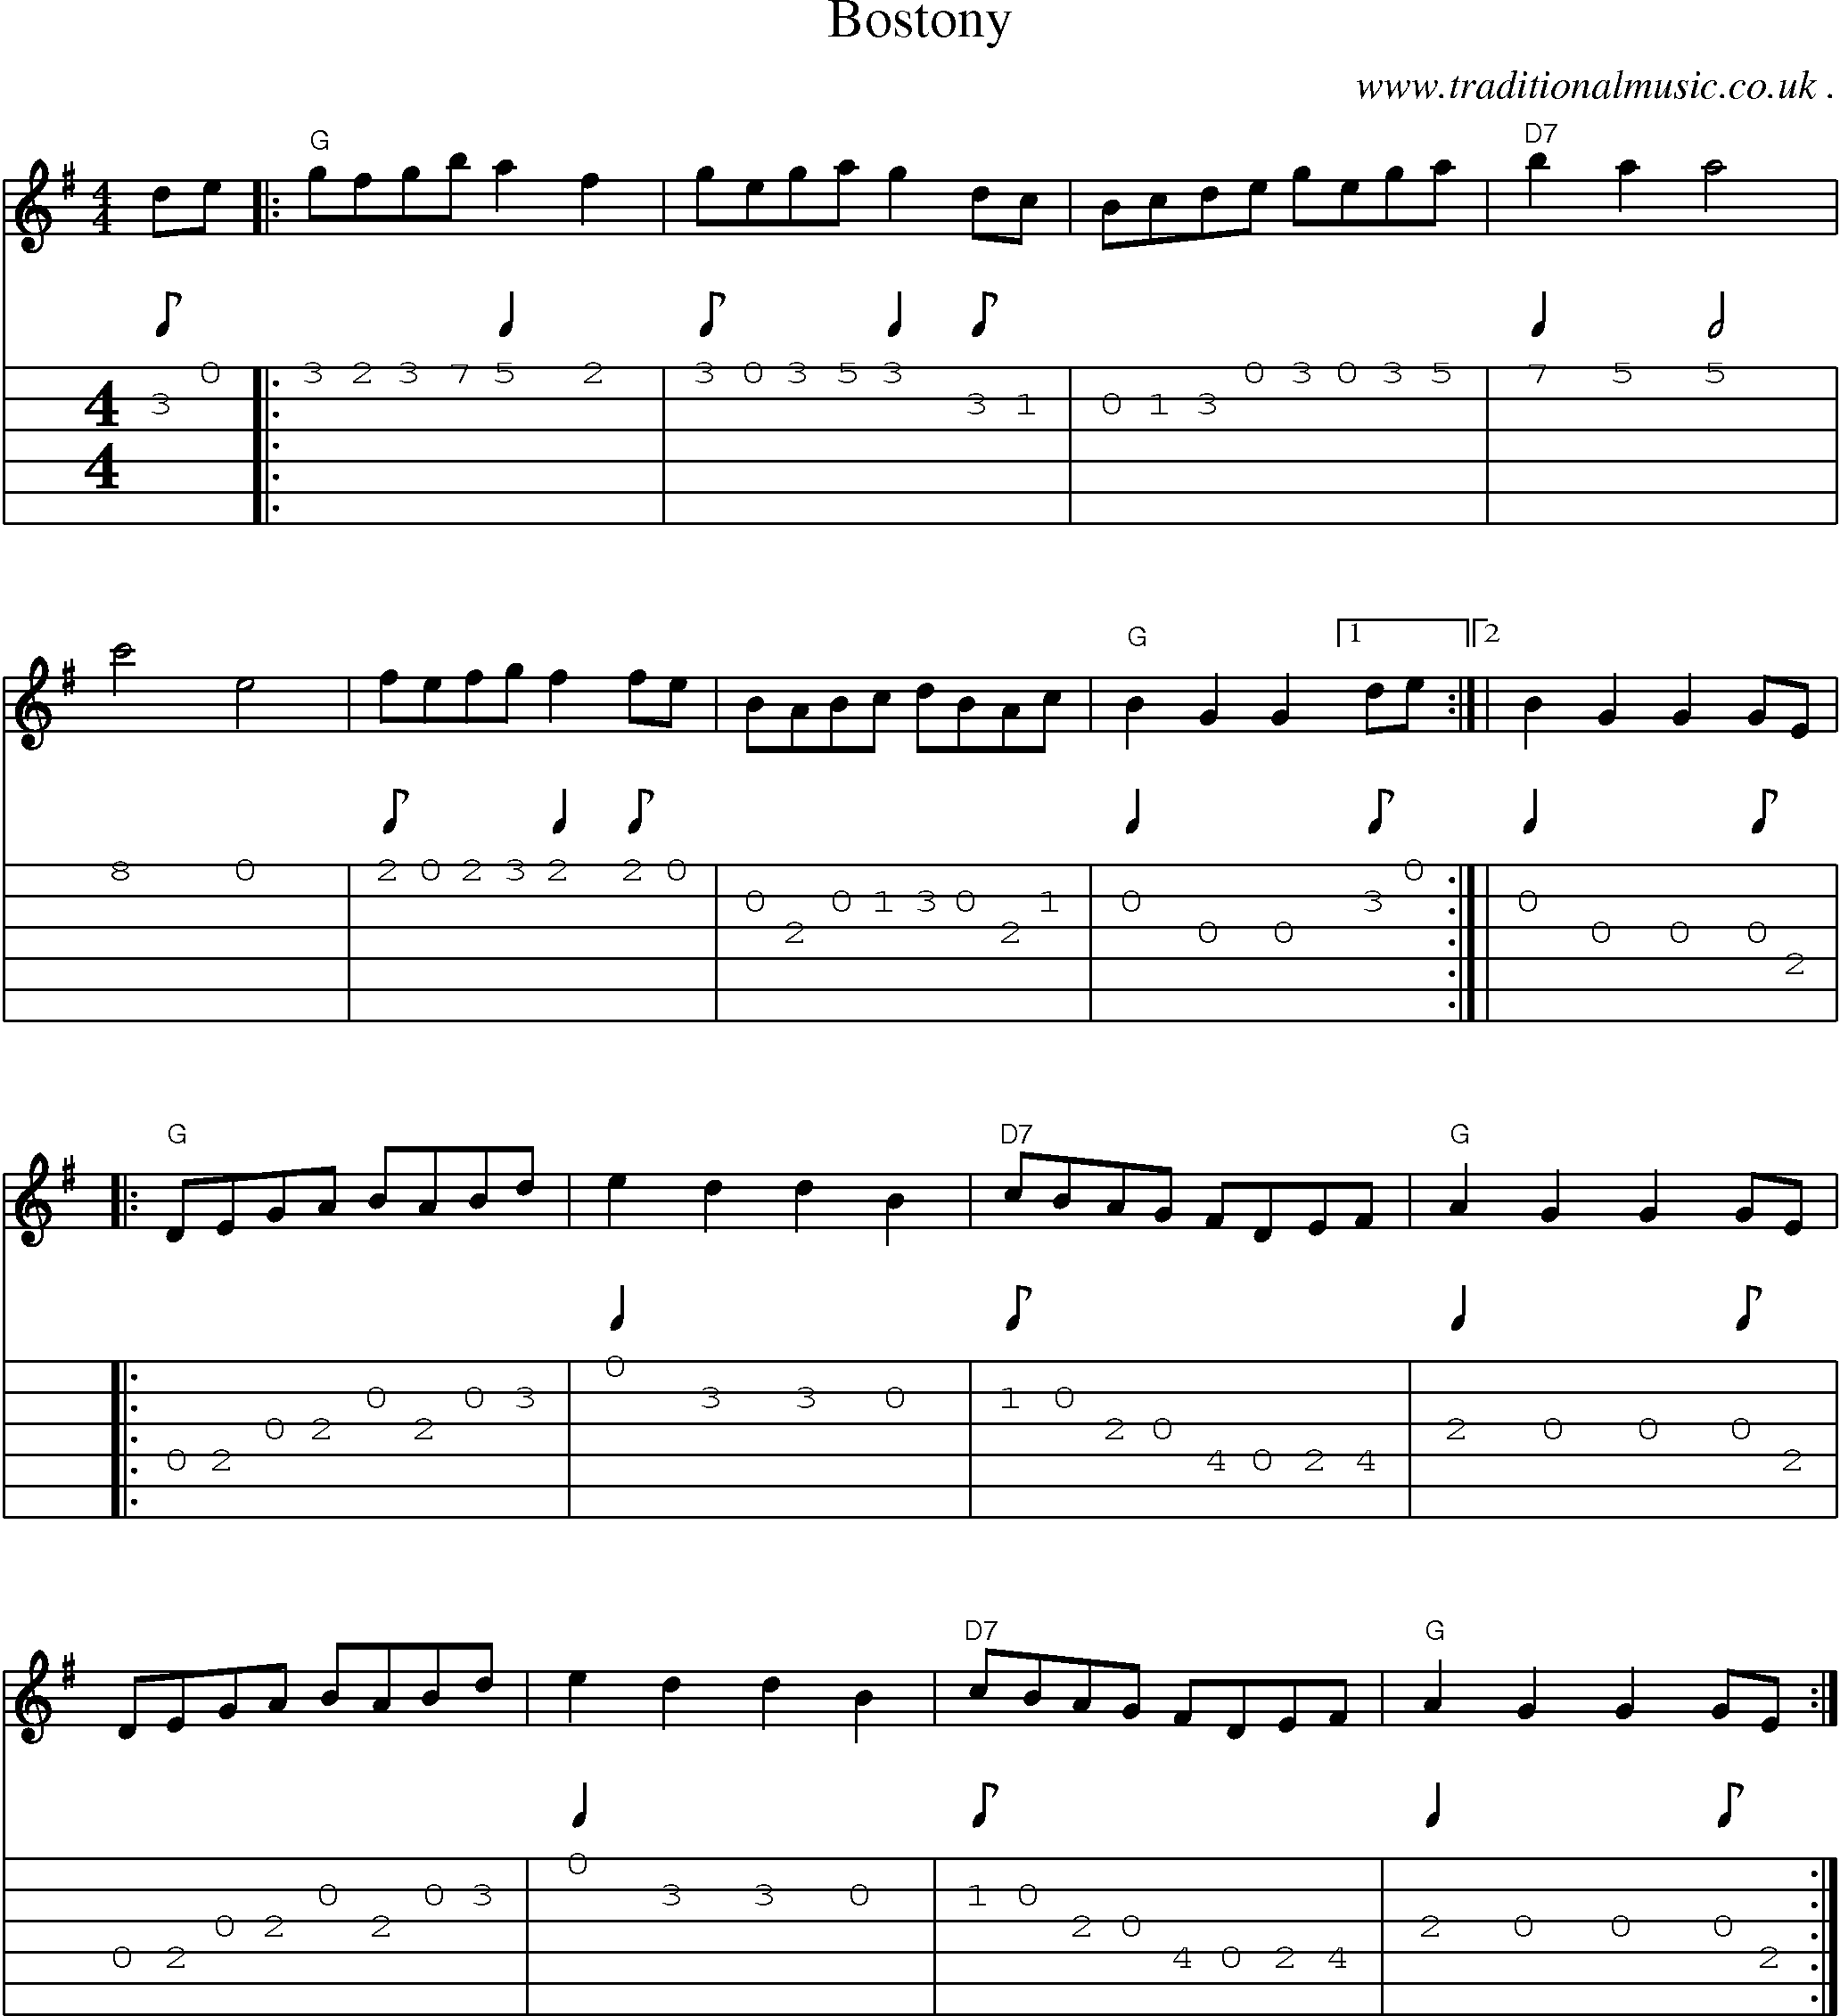 Music Score and Guitar Tabs for Bostony